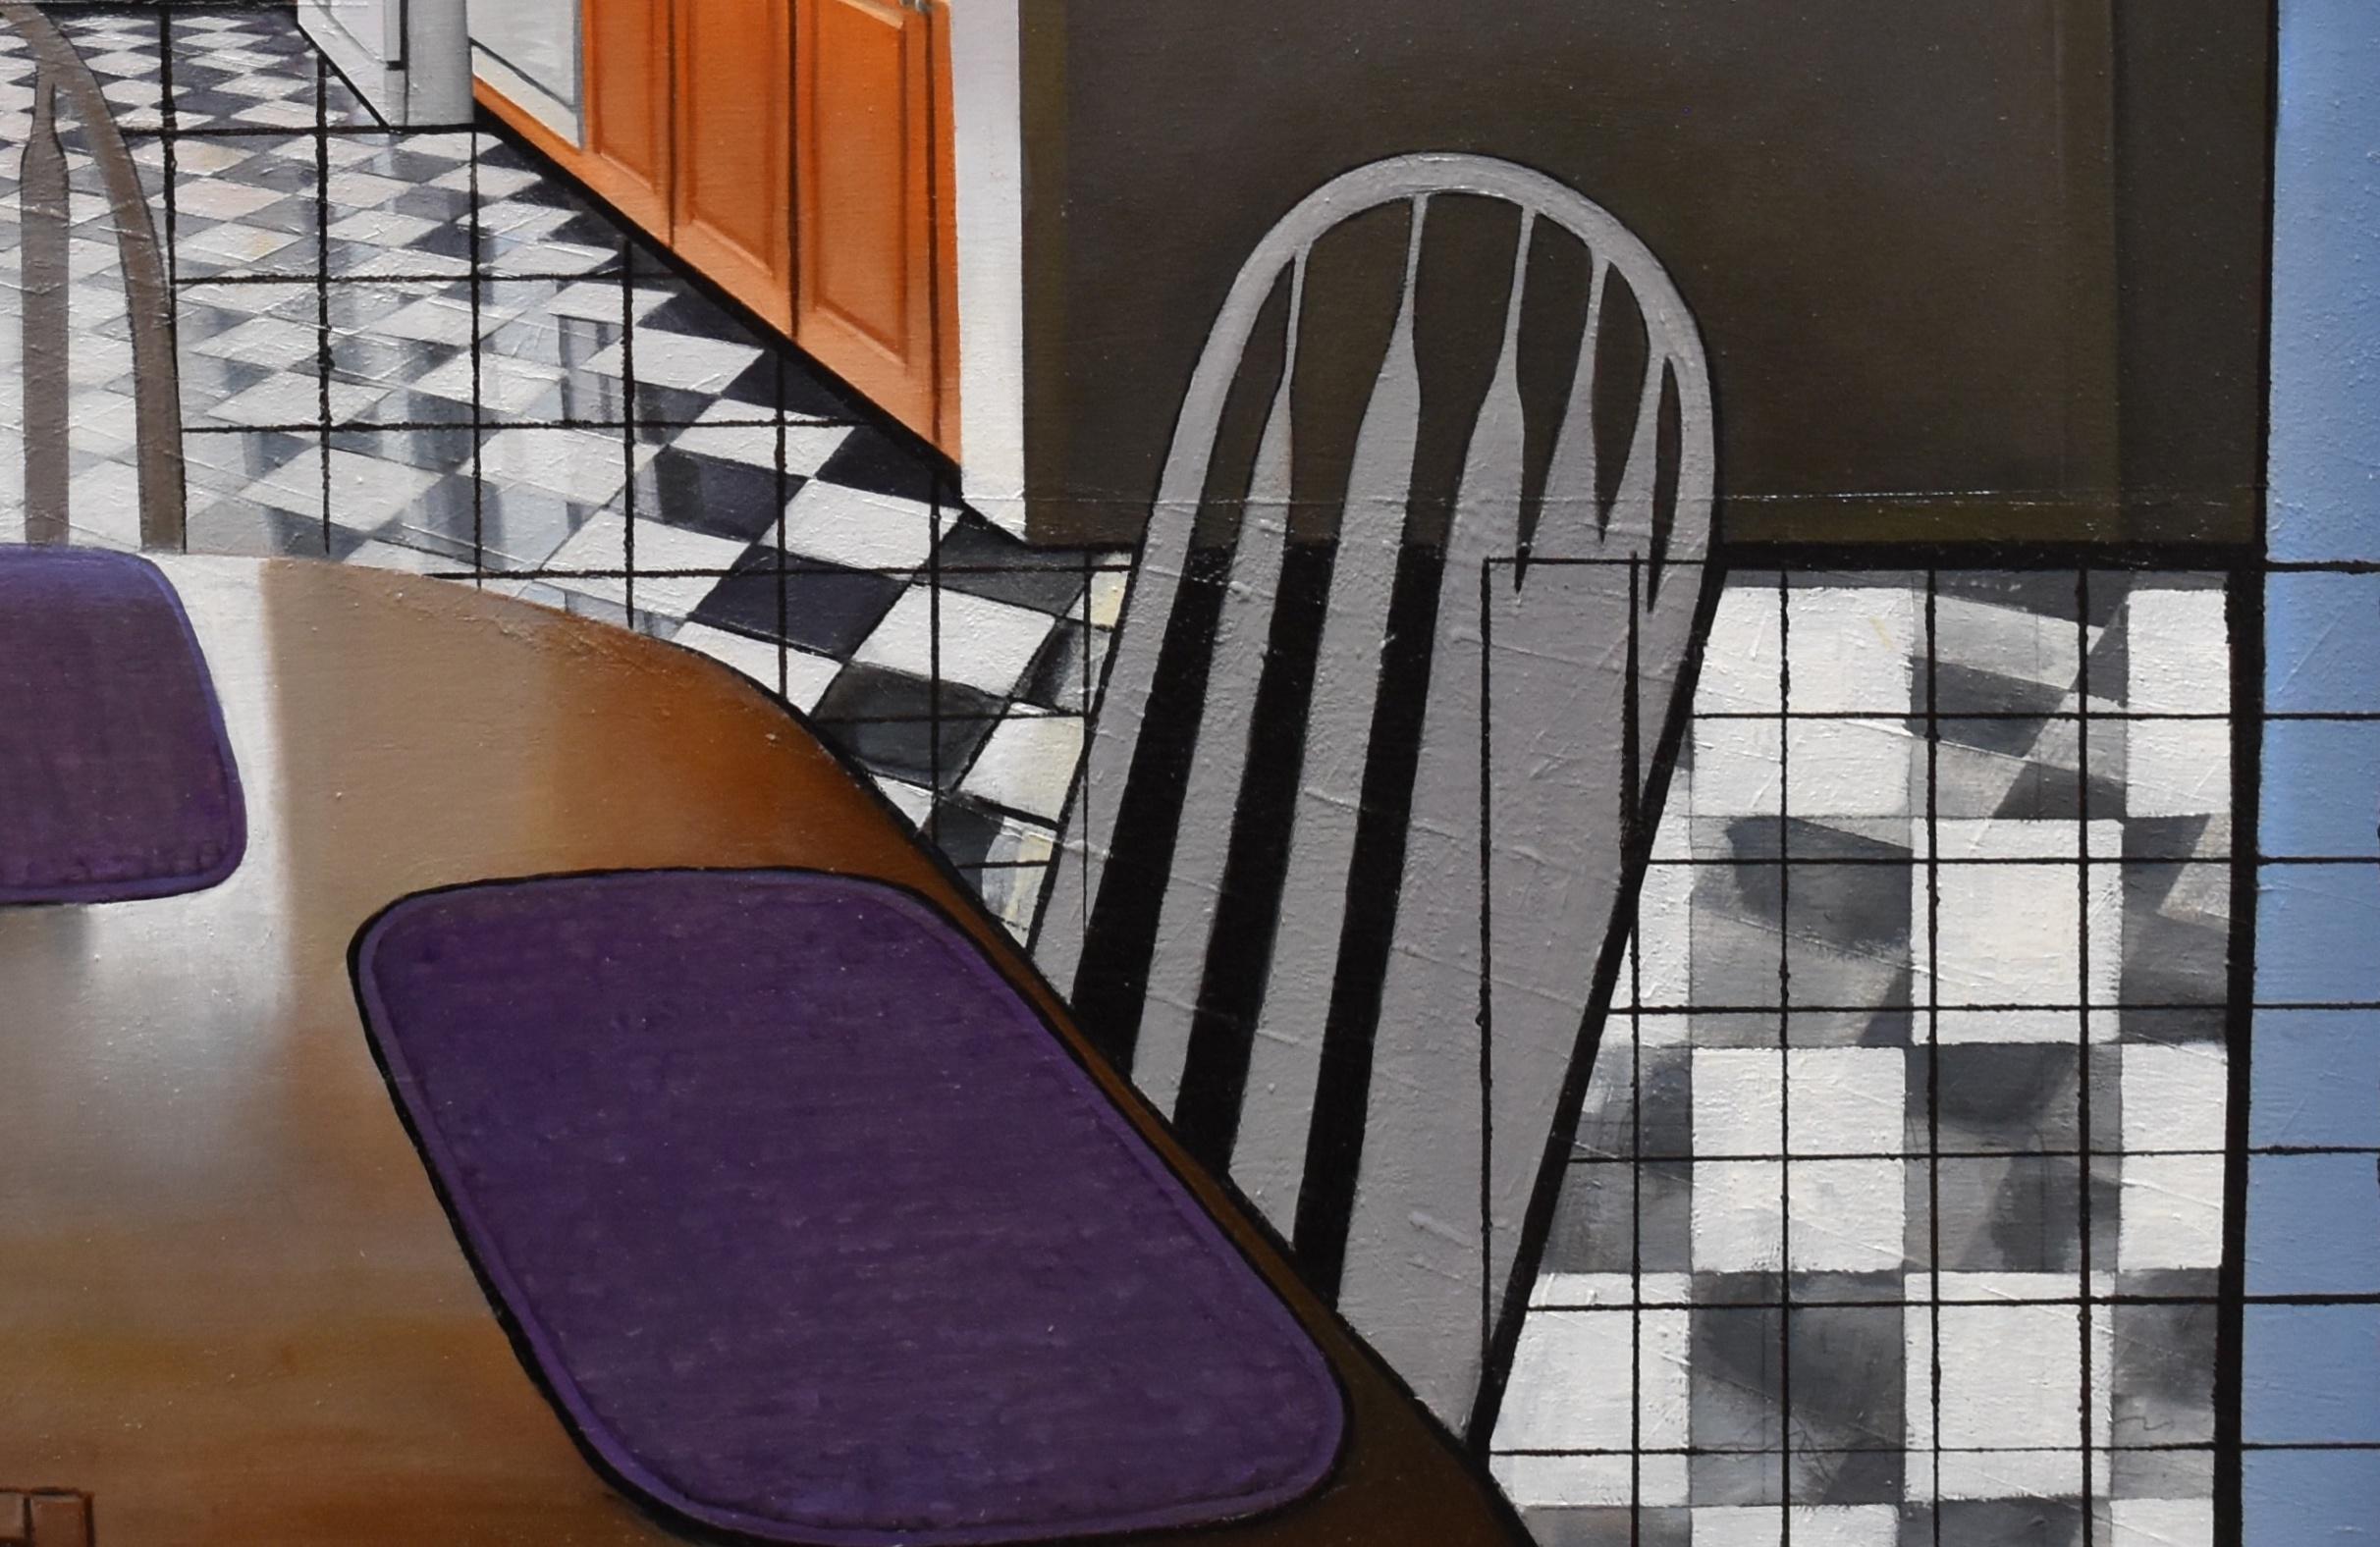 Hillsdale Kitchen, graphic surrealist interior oil painting, 2012 - Painting by Eileen Murphy